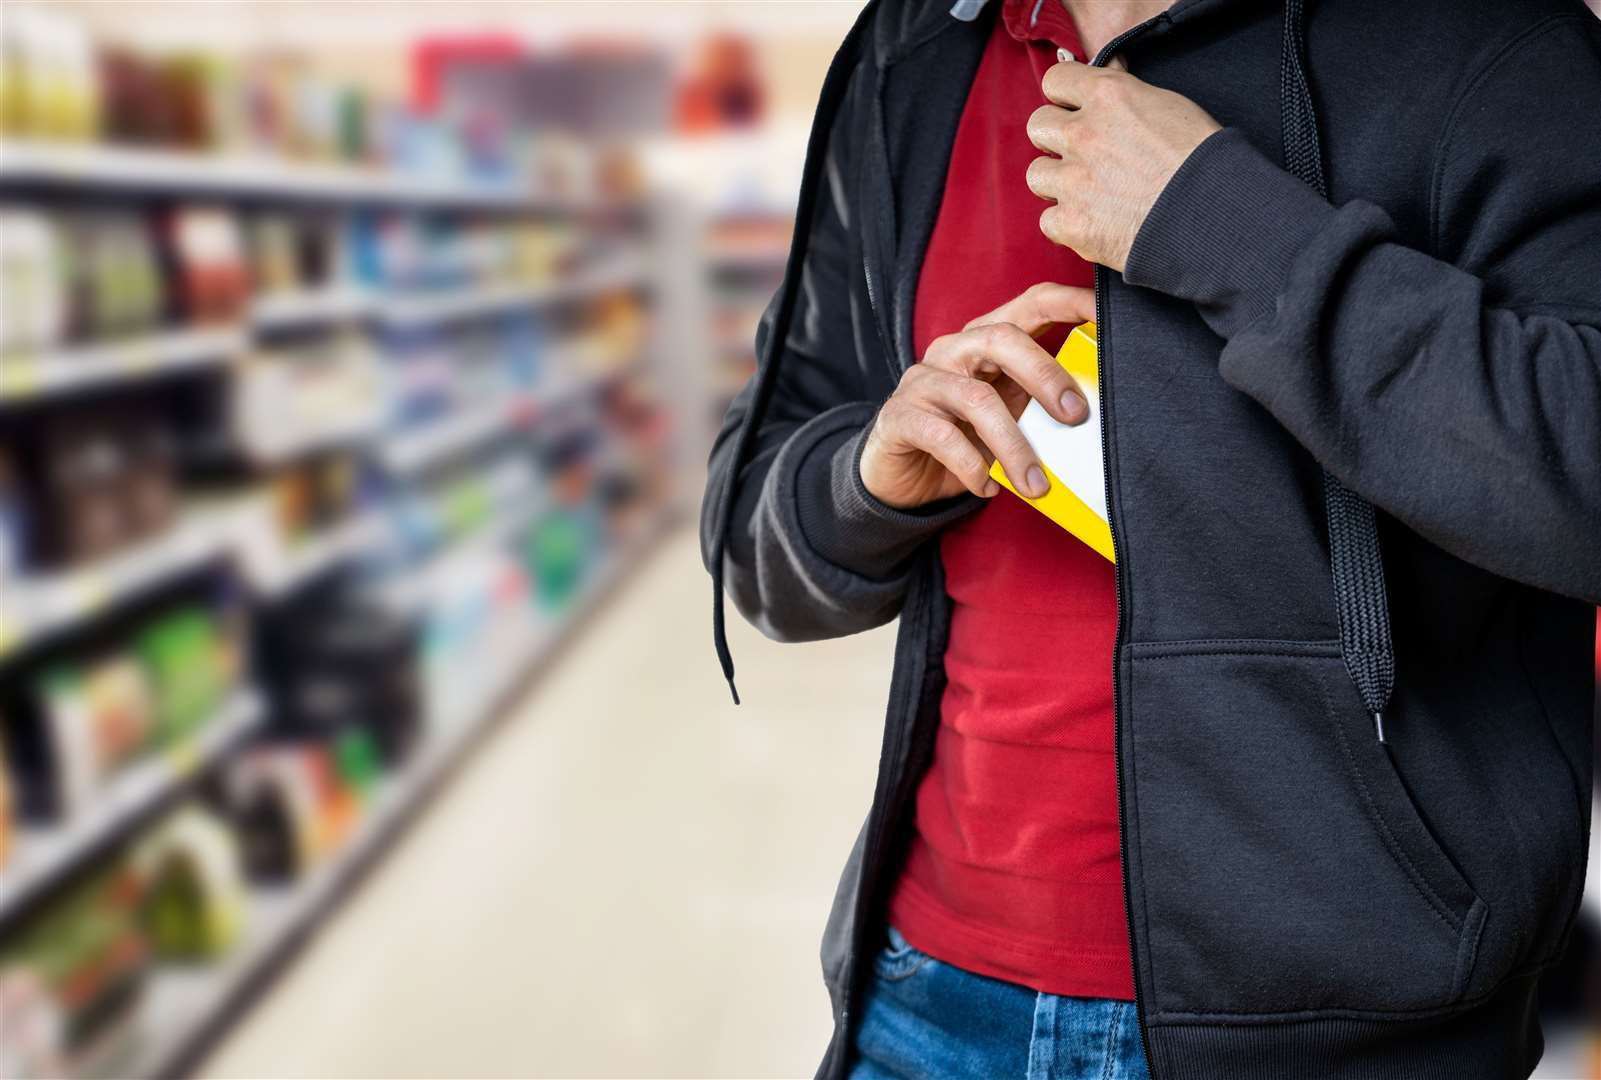 Firms are losing millions to theft say shops and supermarkets. Image: iStock.